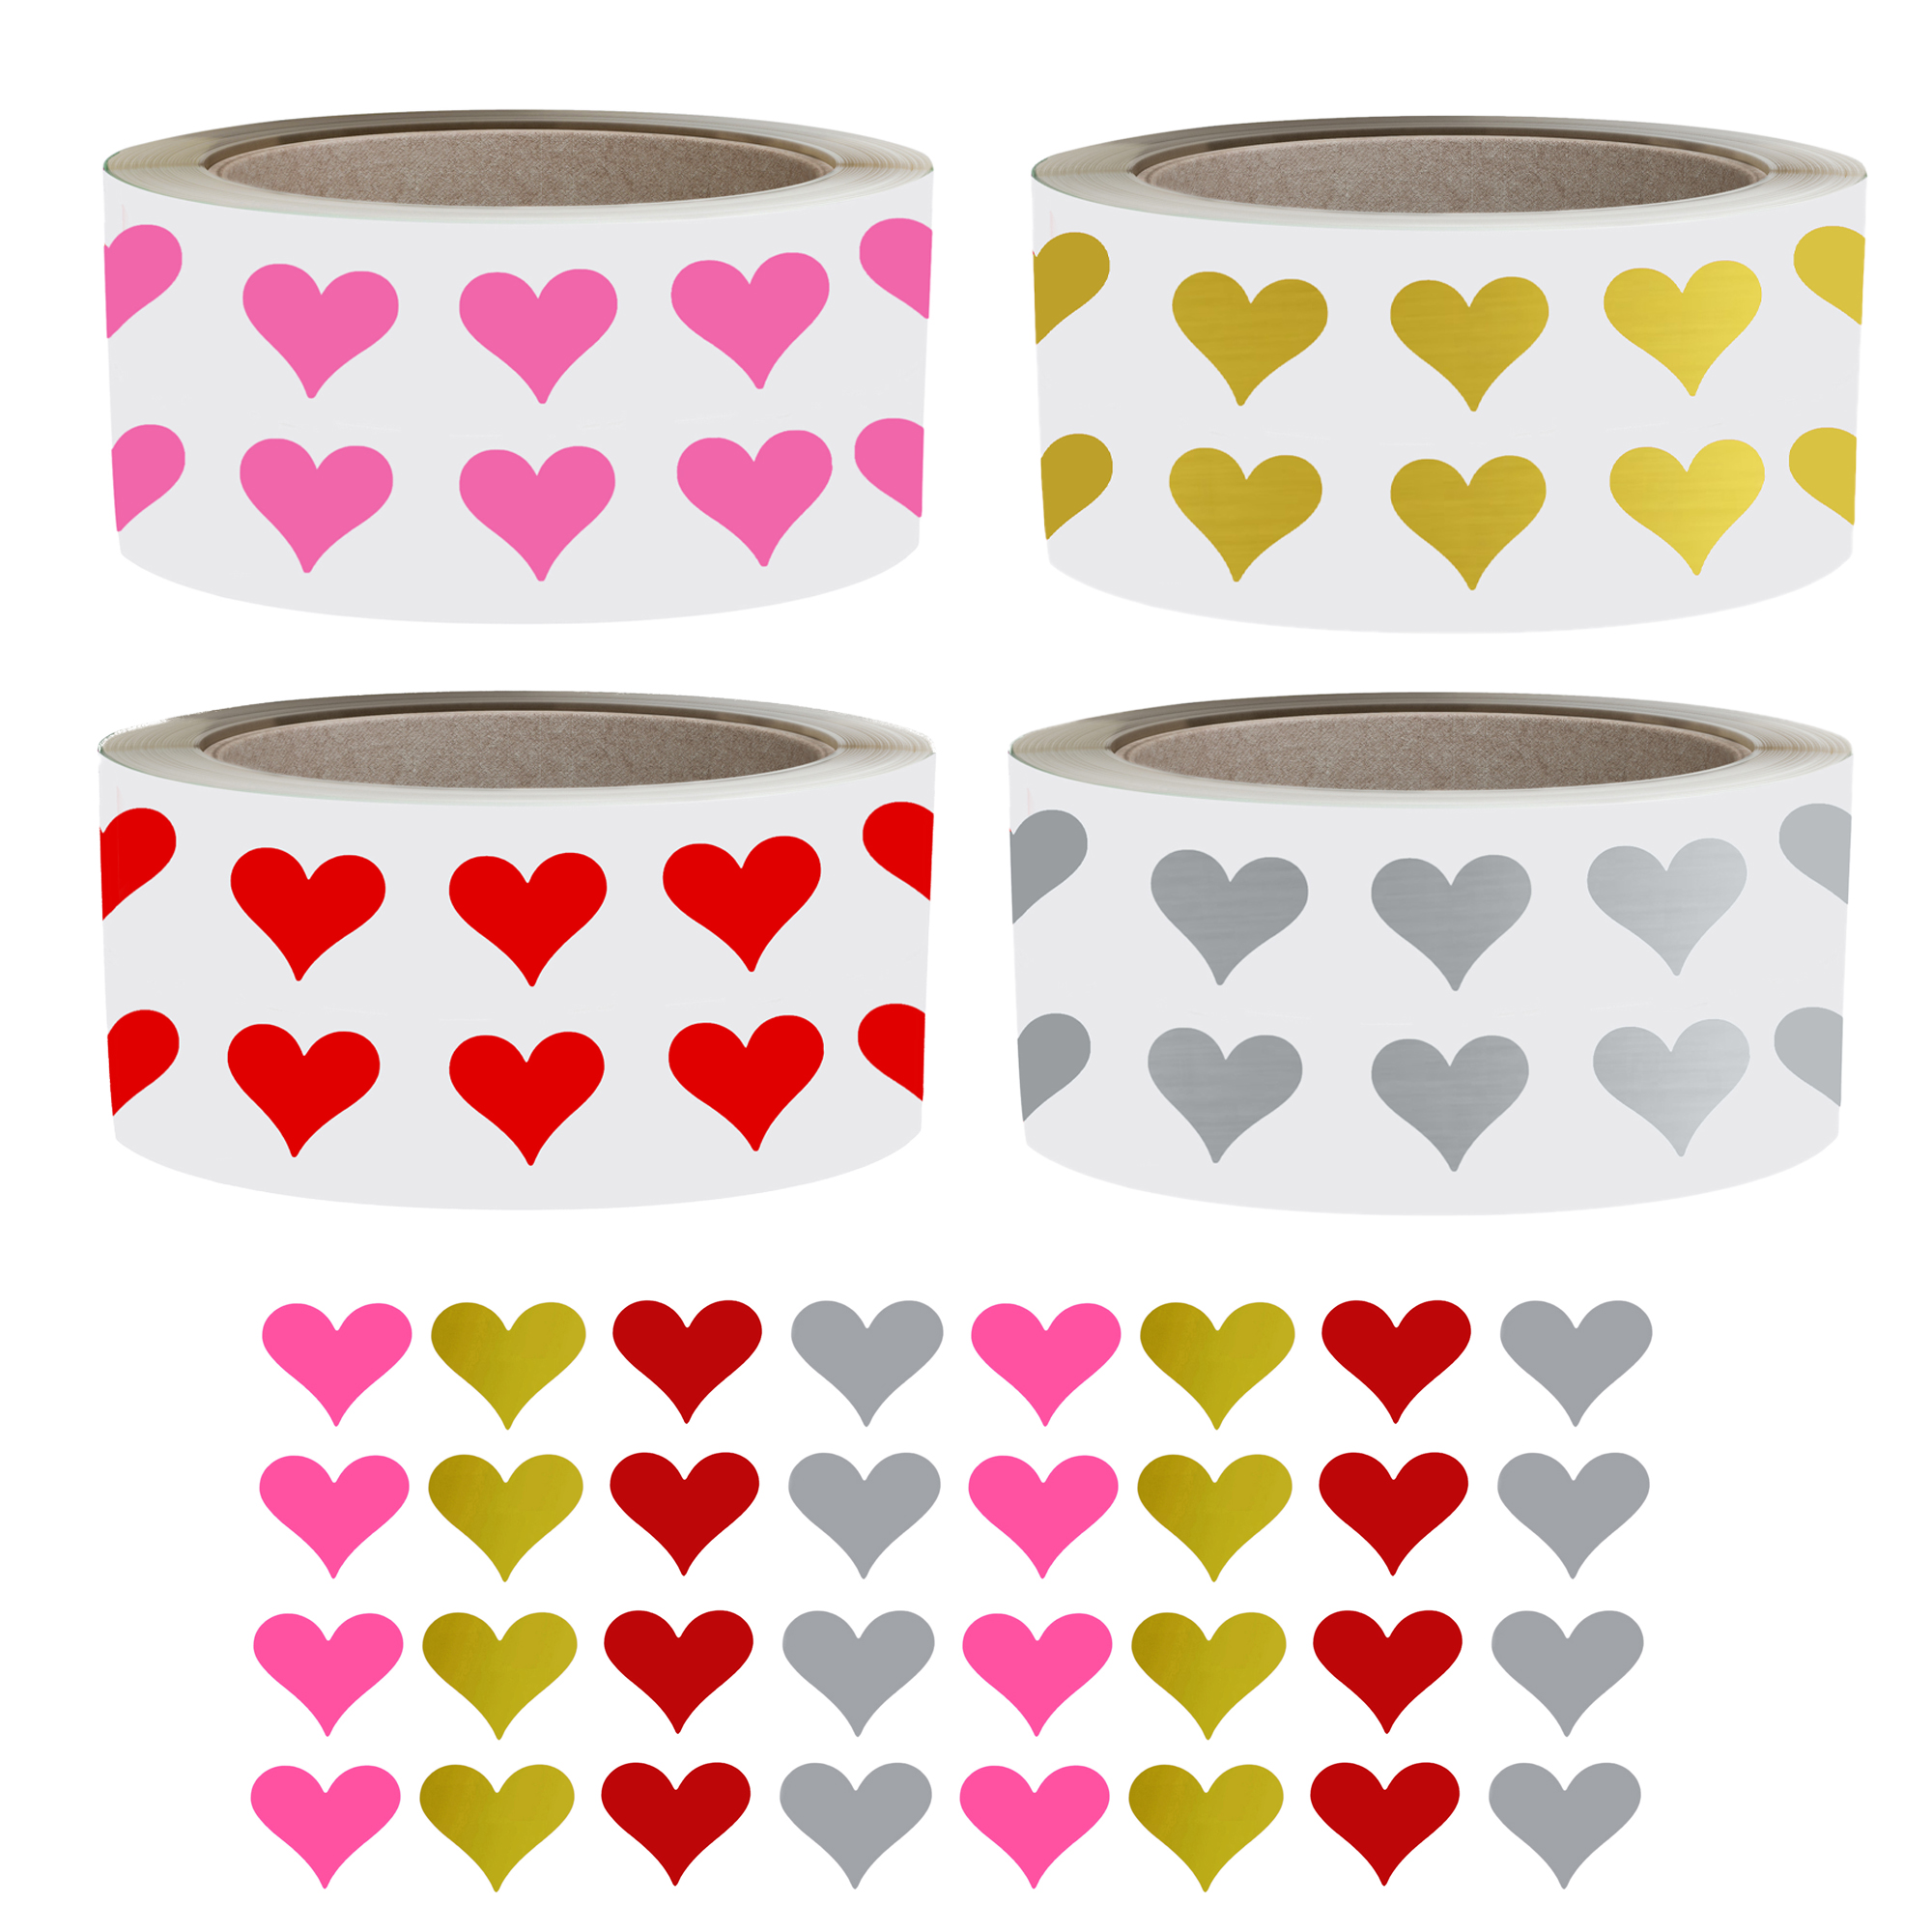 Royal Green Small Heart Sticker Rolls in 4 Colors Red, Pink, Gold